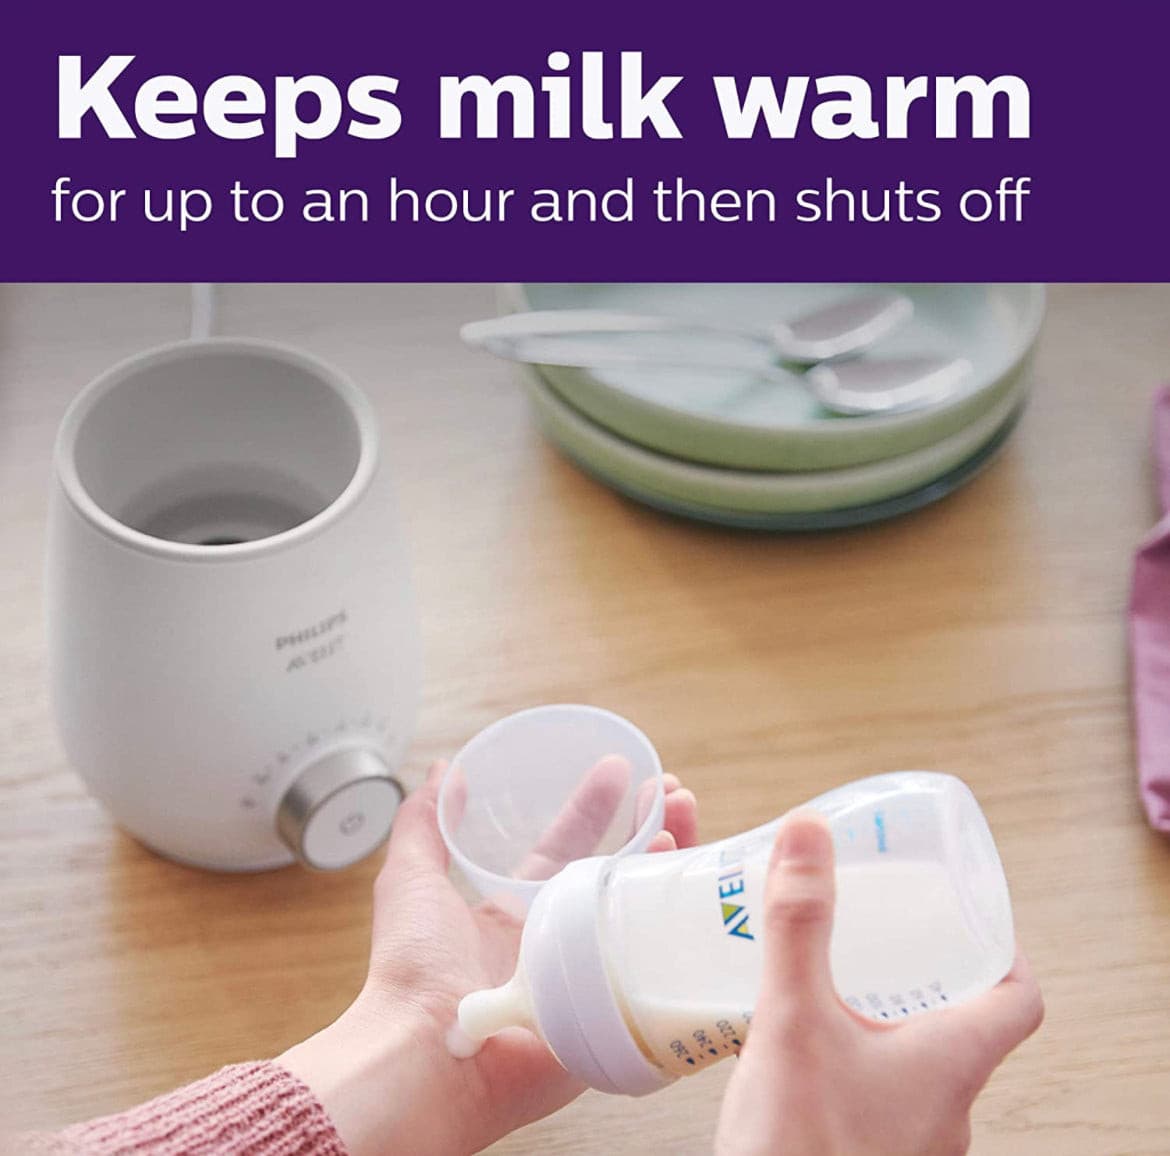 Baby Bottle Warmer With Auto Shut-Off by Philips AVENT.